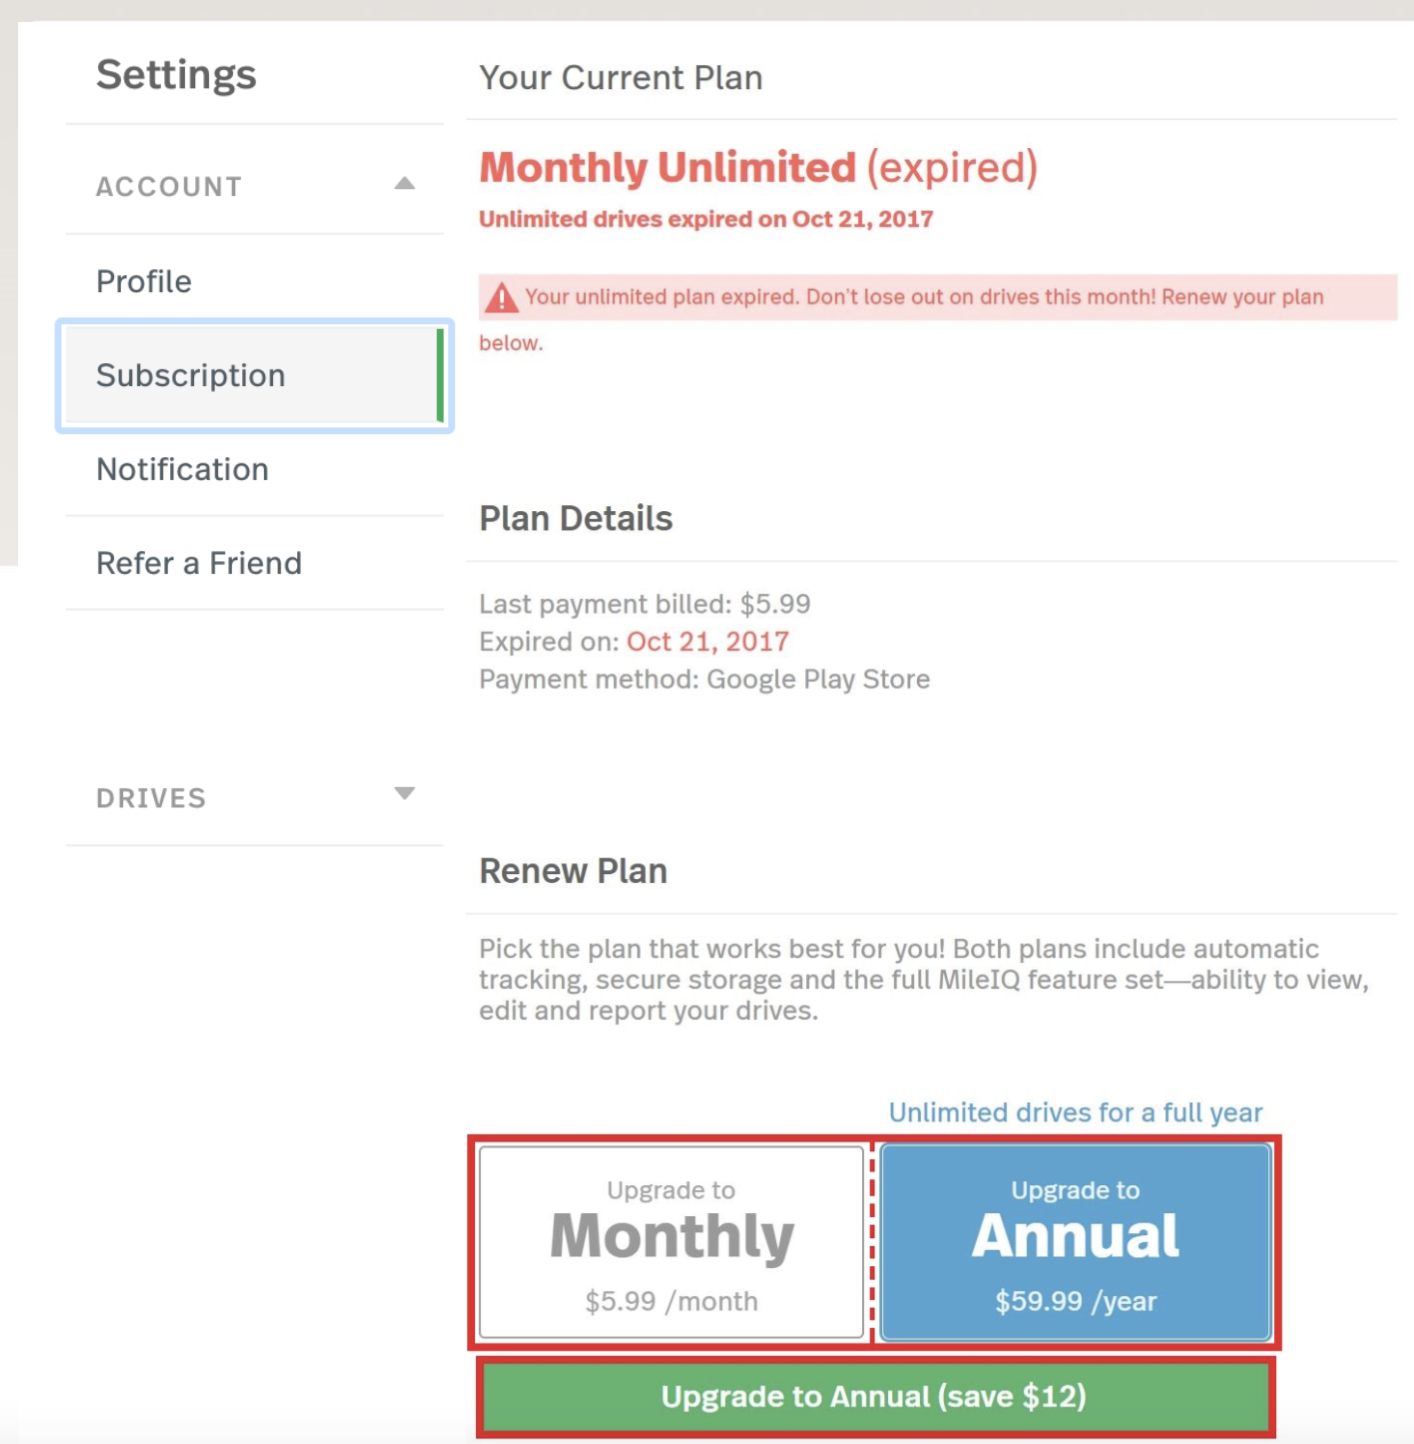 This shows the renewal options for your subscription for Monthly or Annual